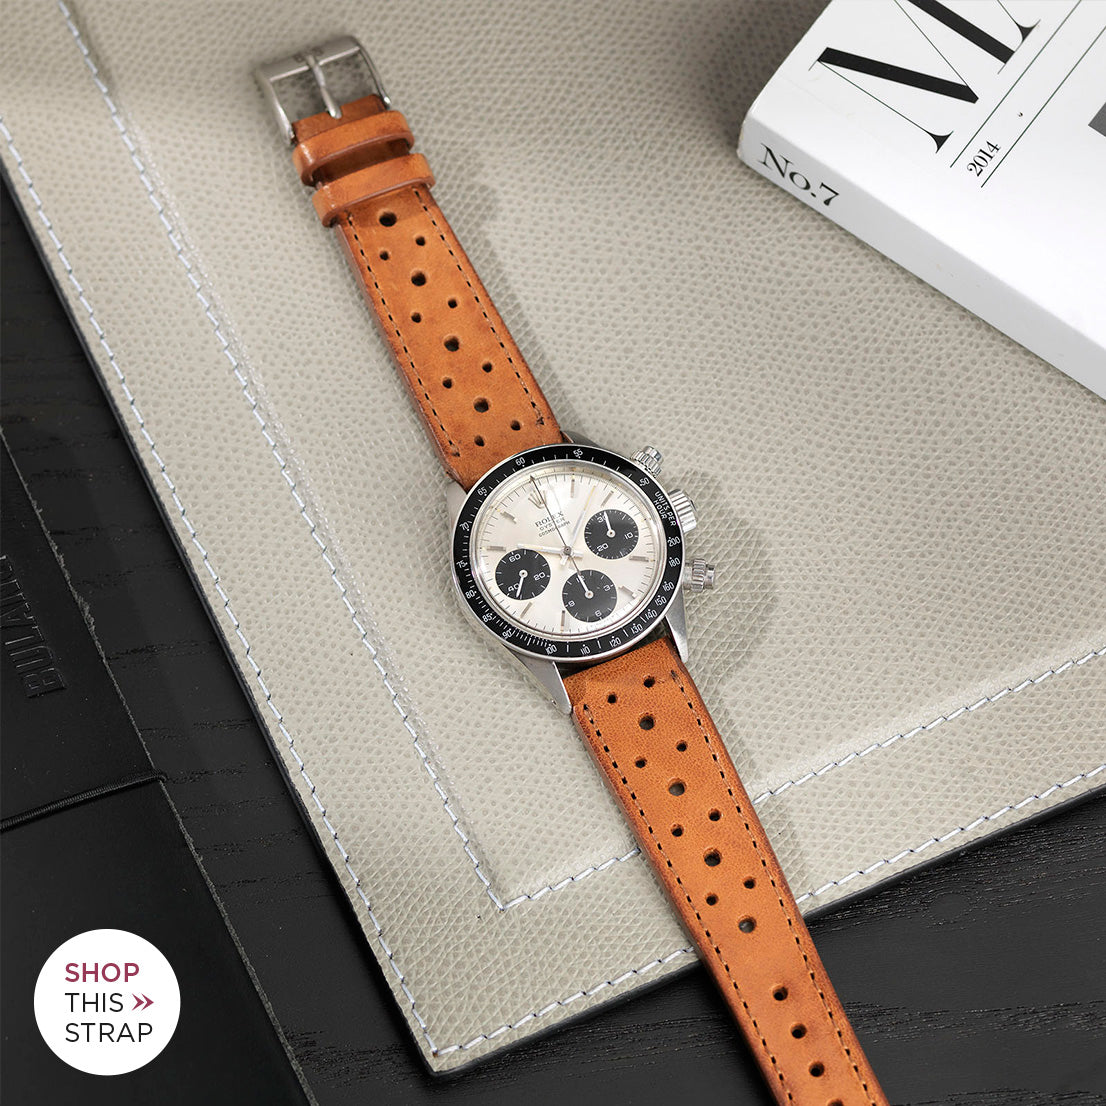 Bulang and Sons_Strap Guide_The Rolex Daytona 6263_Racing Caramel Brown Leather Watch Strap